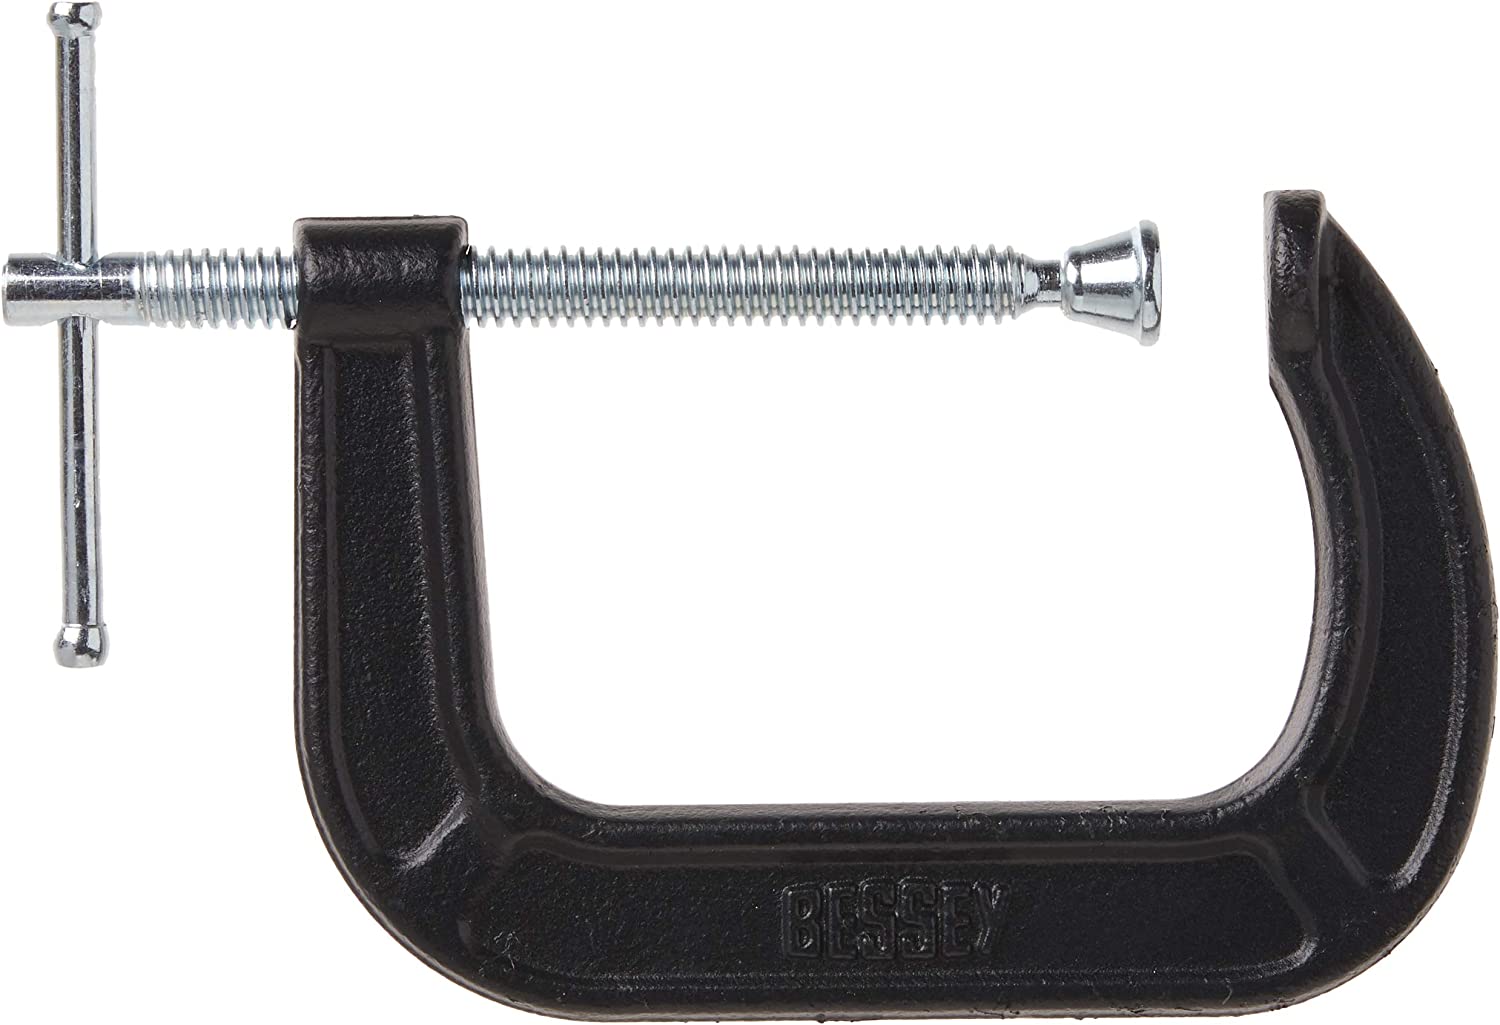 Bessey Tools CM40 Drop Forged C-Clamp, 4" - Amazon - $4.26